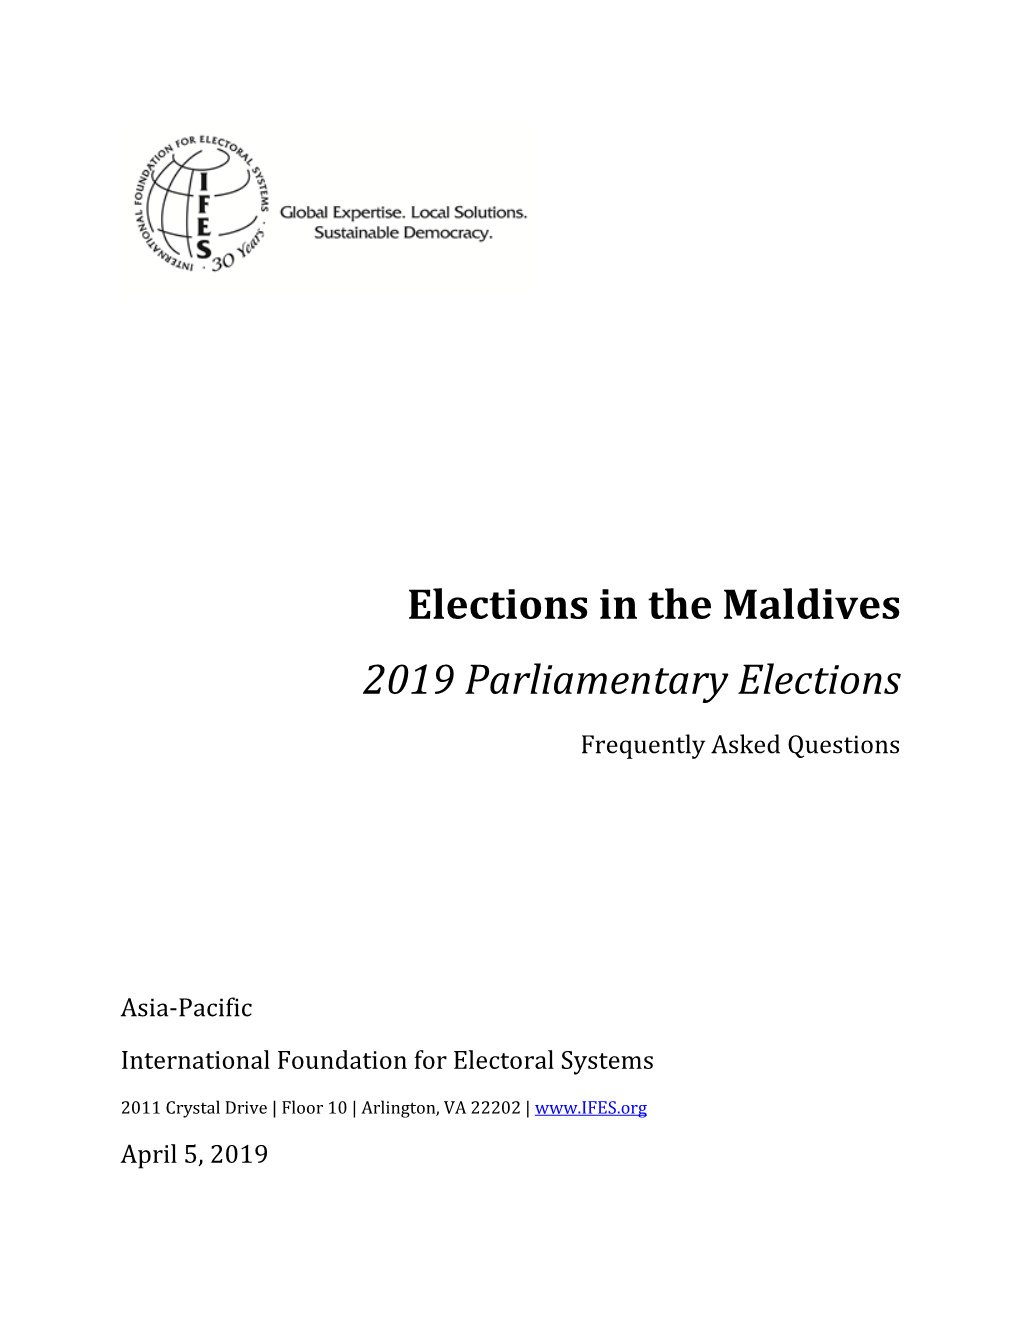 IFES Faqs on Elections in the Maldives